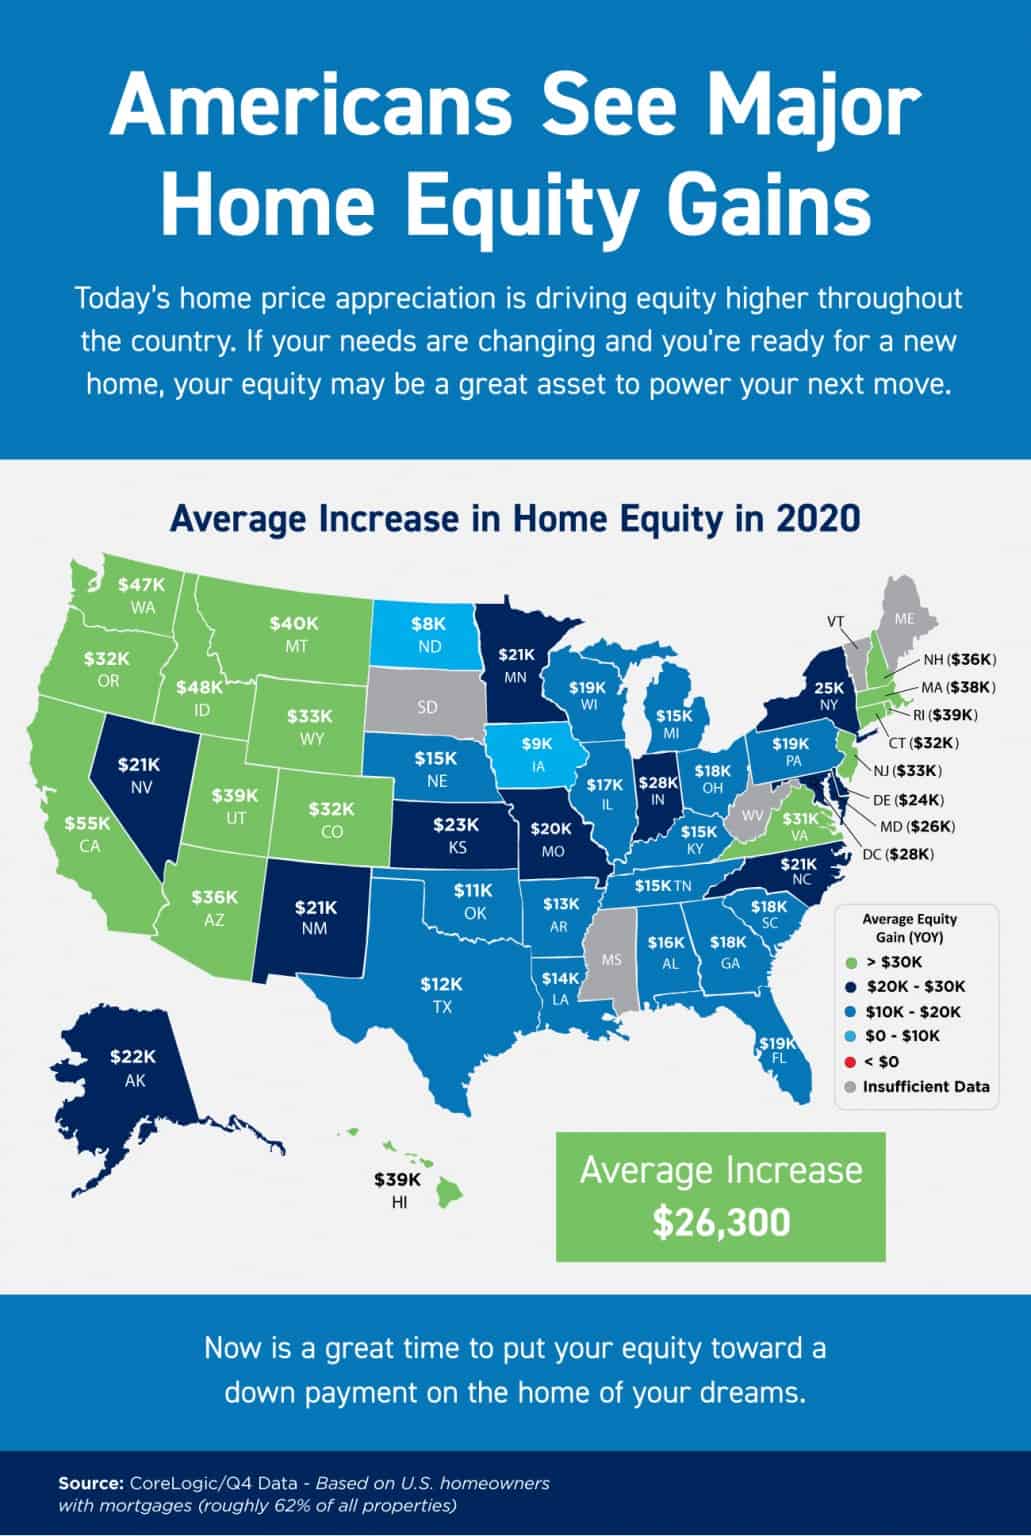 Americans See Major Home Equity Gains [INFOGRAPHIC]